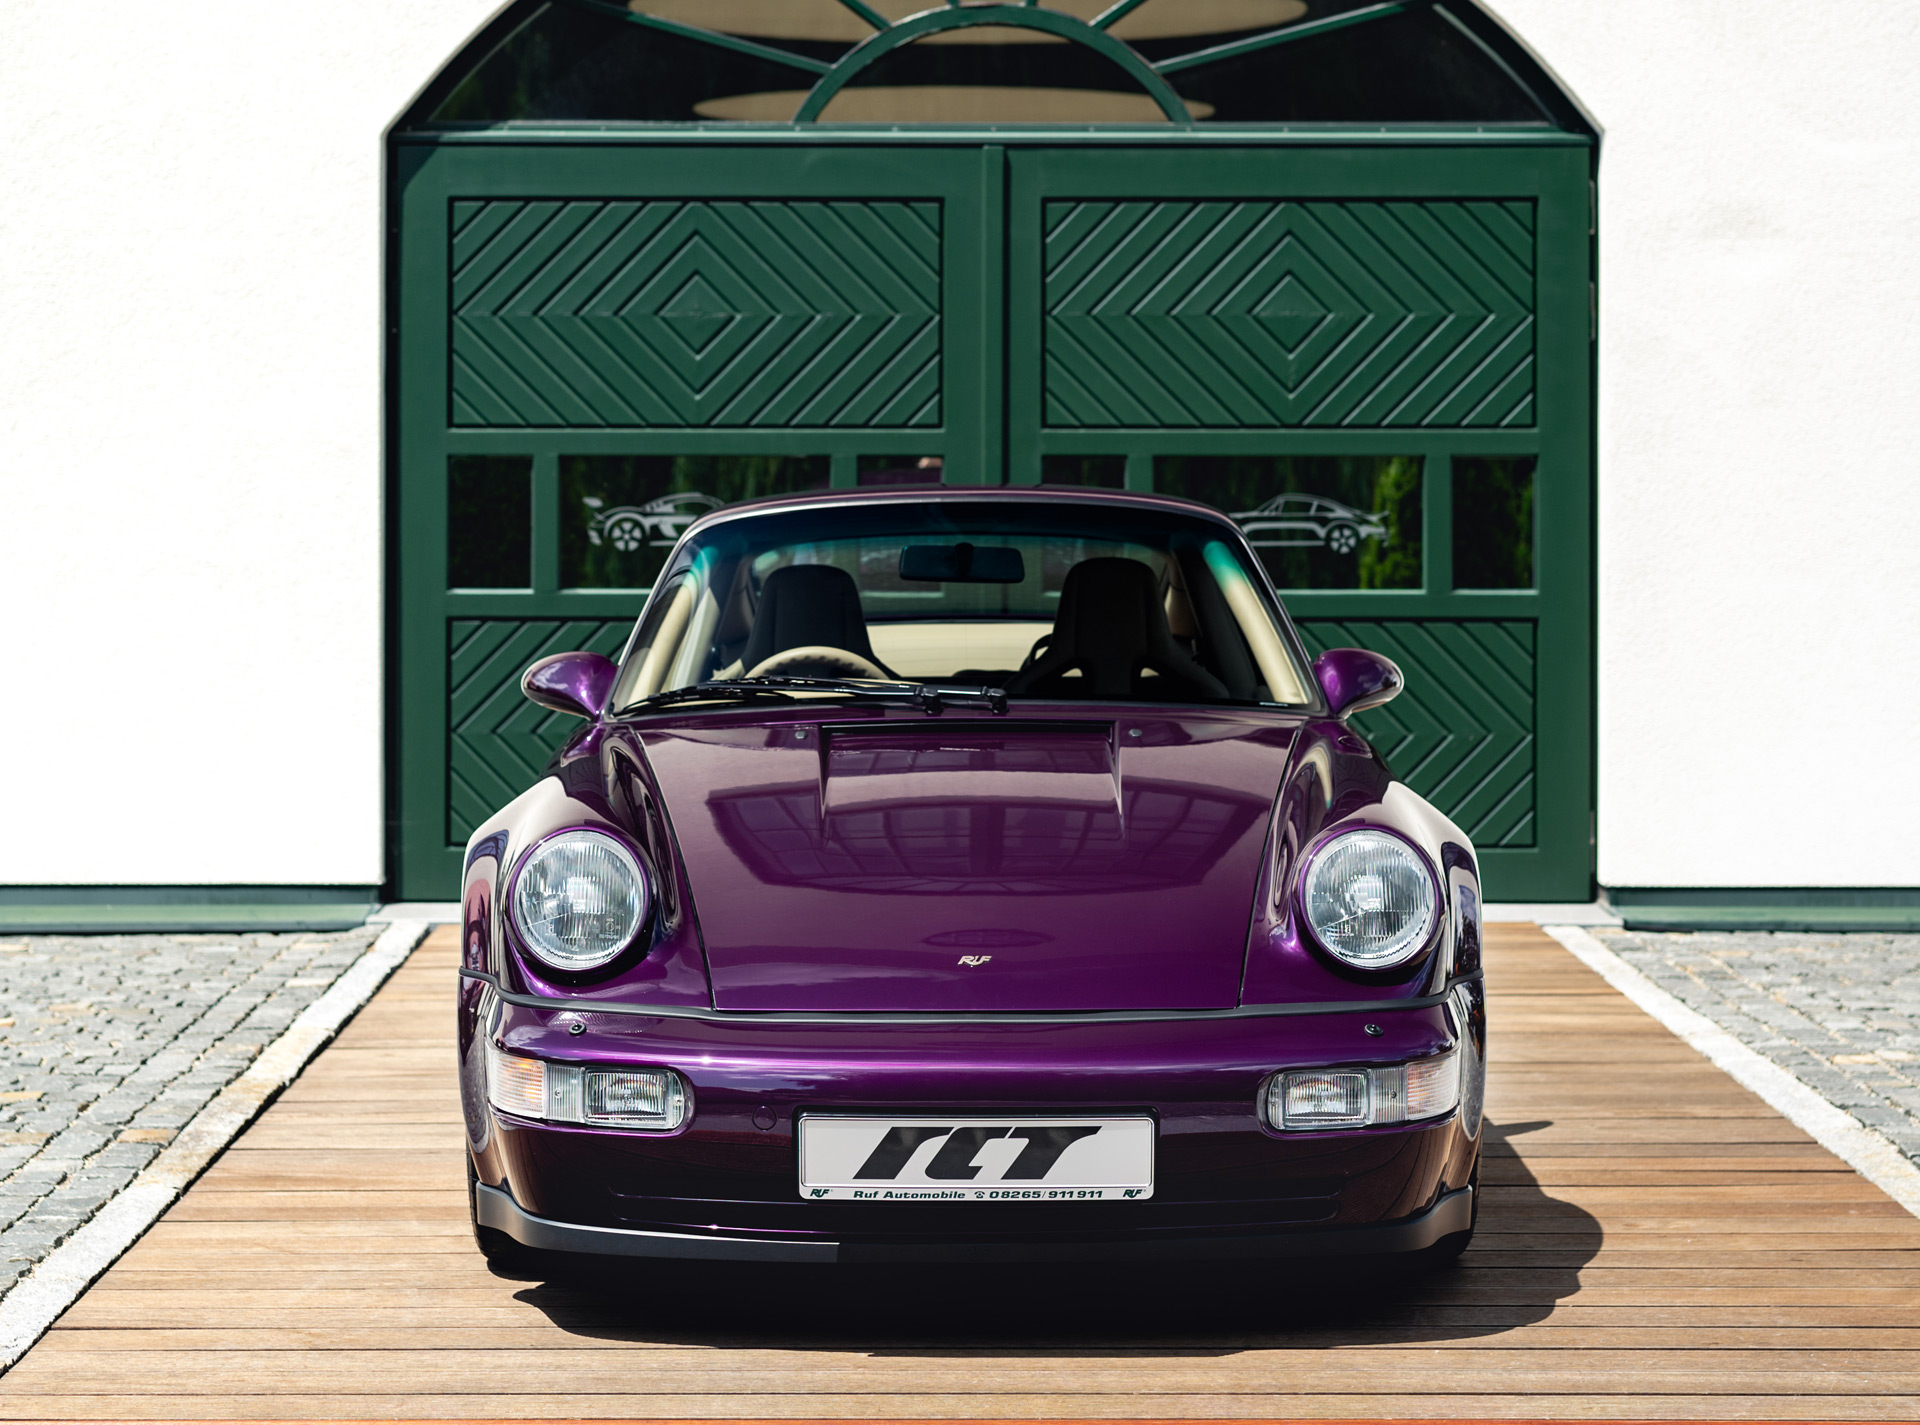 Learn the story behind Ruf Automobile Auto Recent